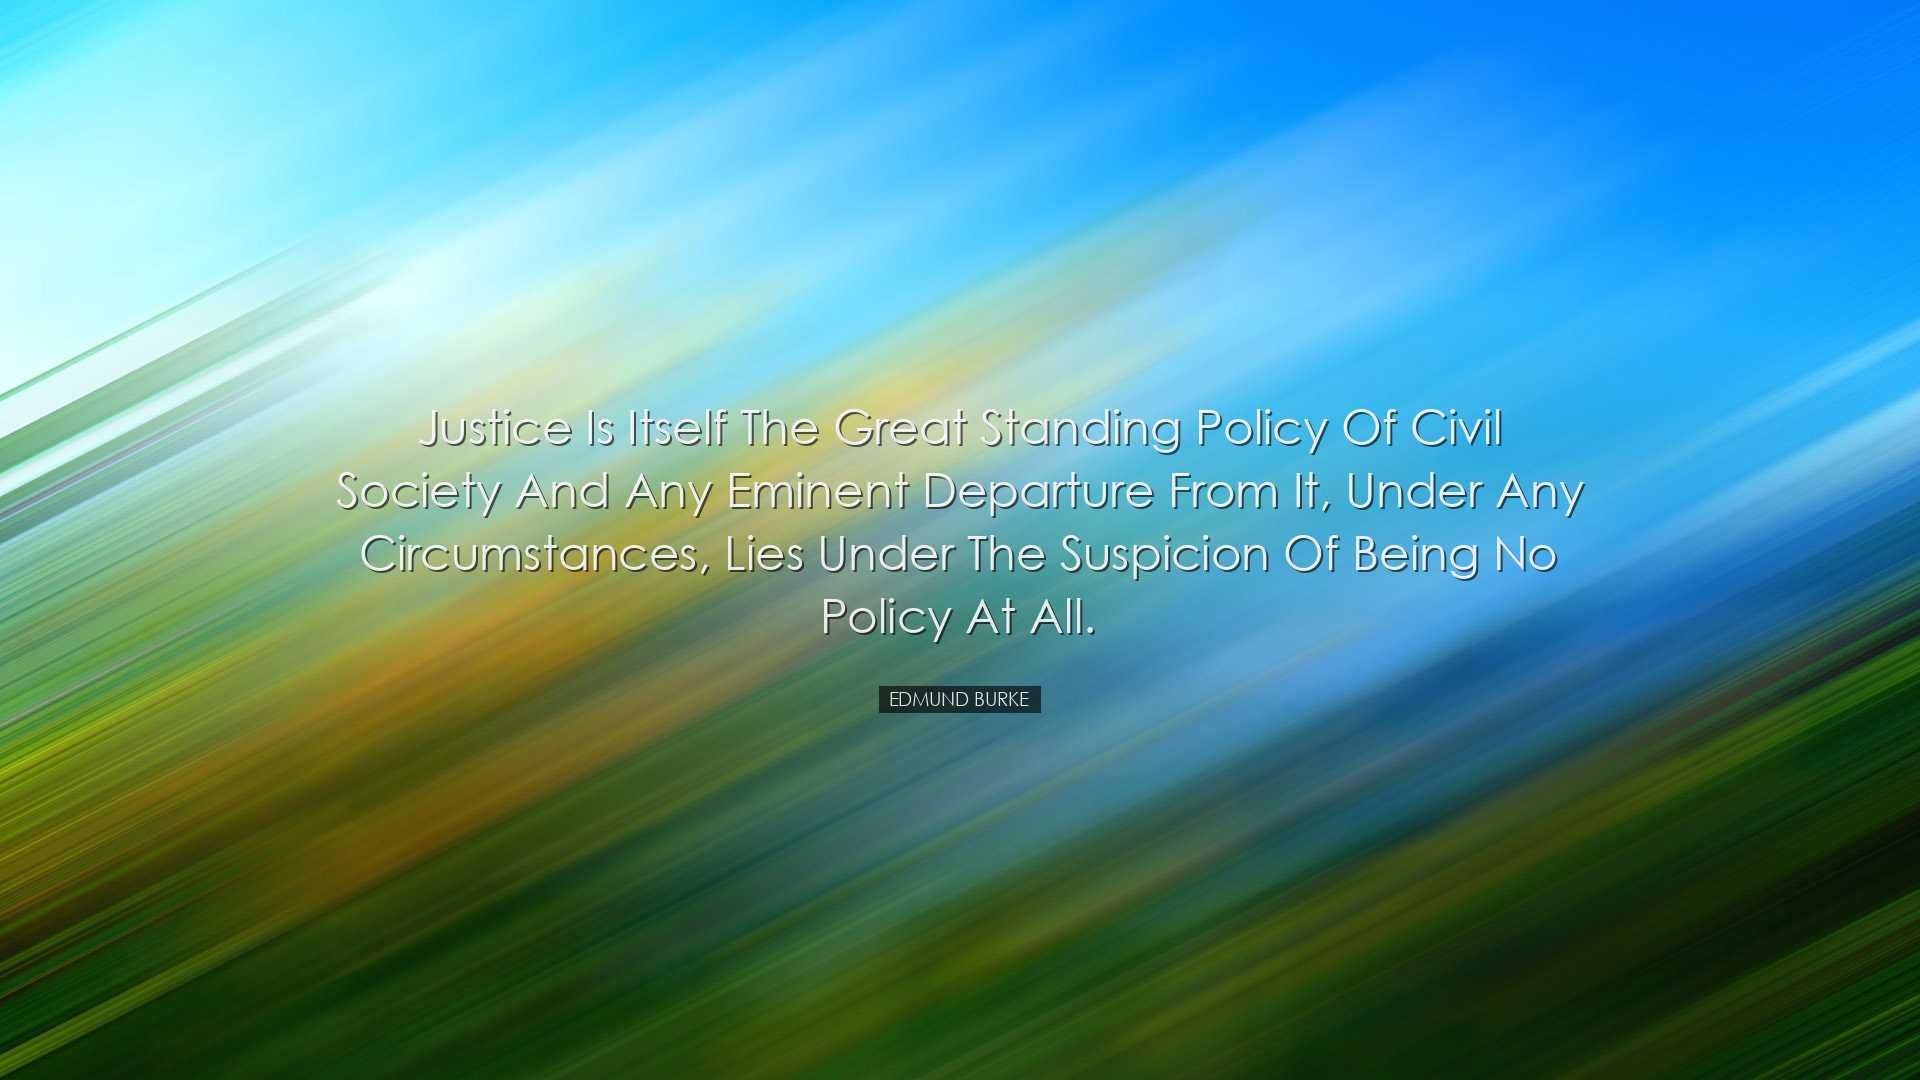 Justice is itself the great standing policy of civil society and a